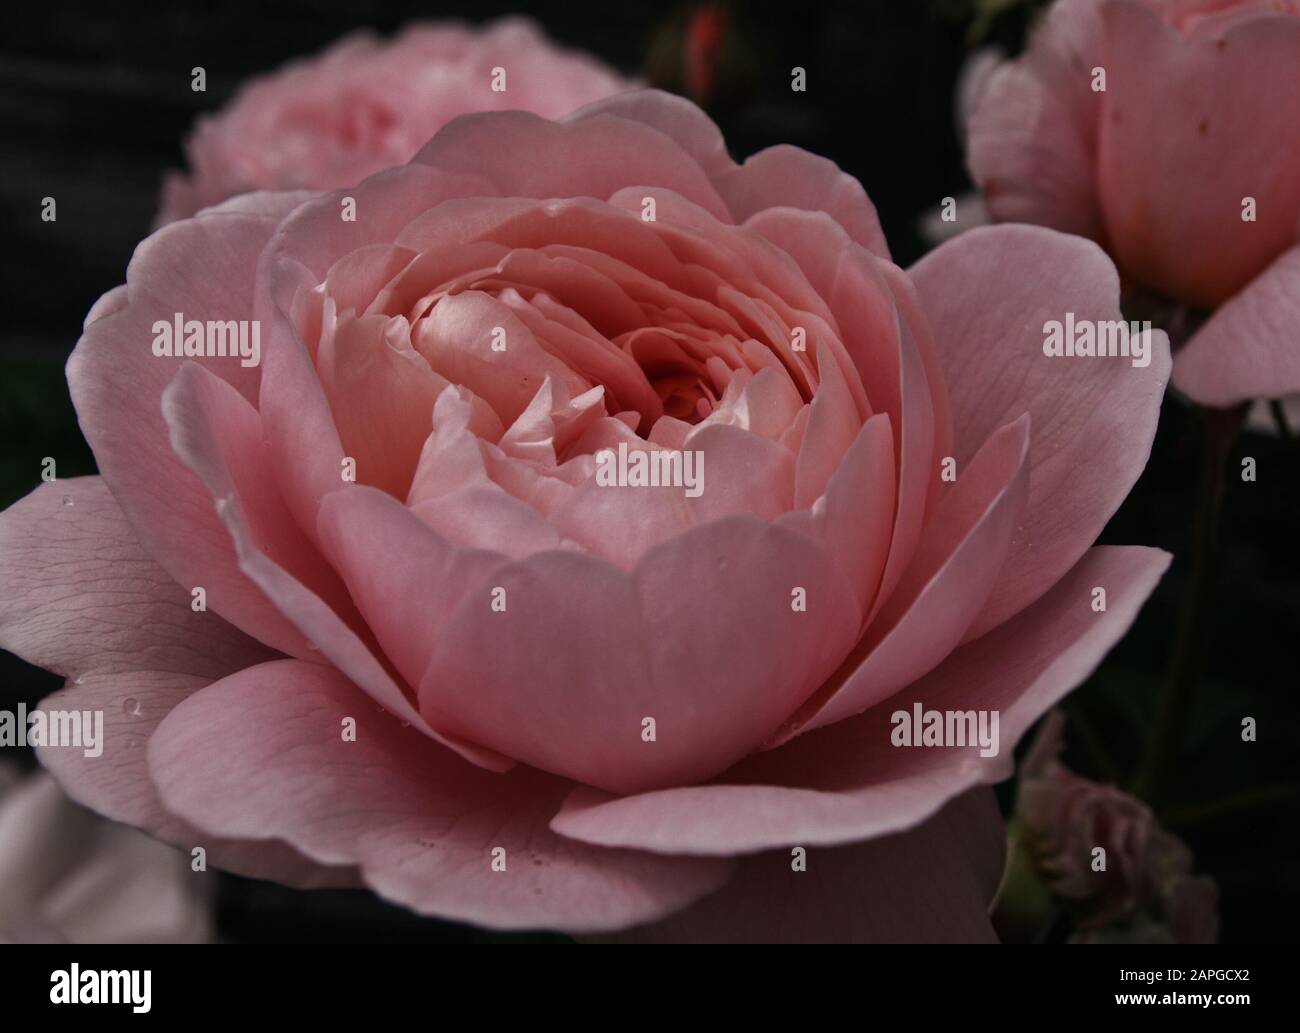 hi-res and sweden Alamy queen images stock - Rose photography of